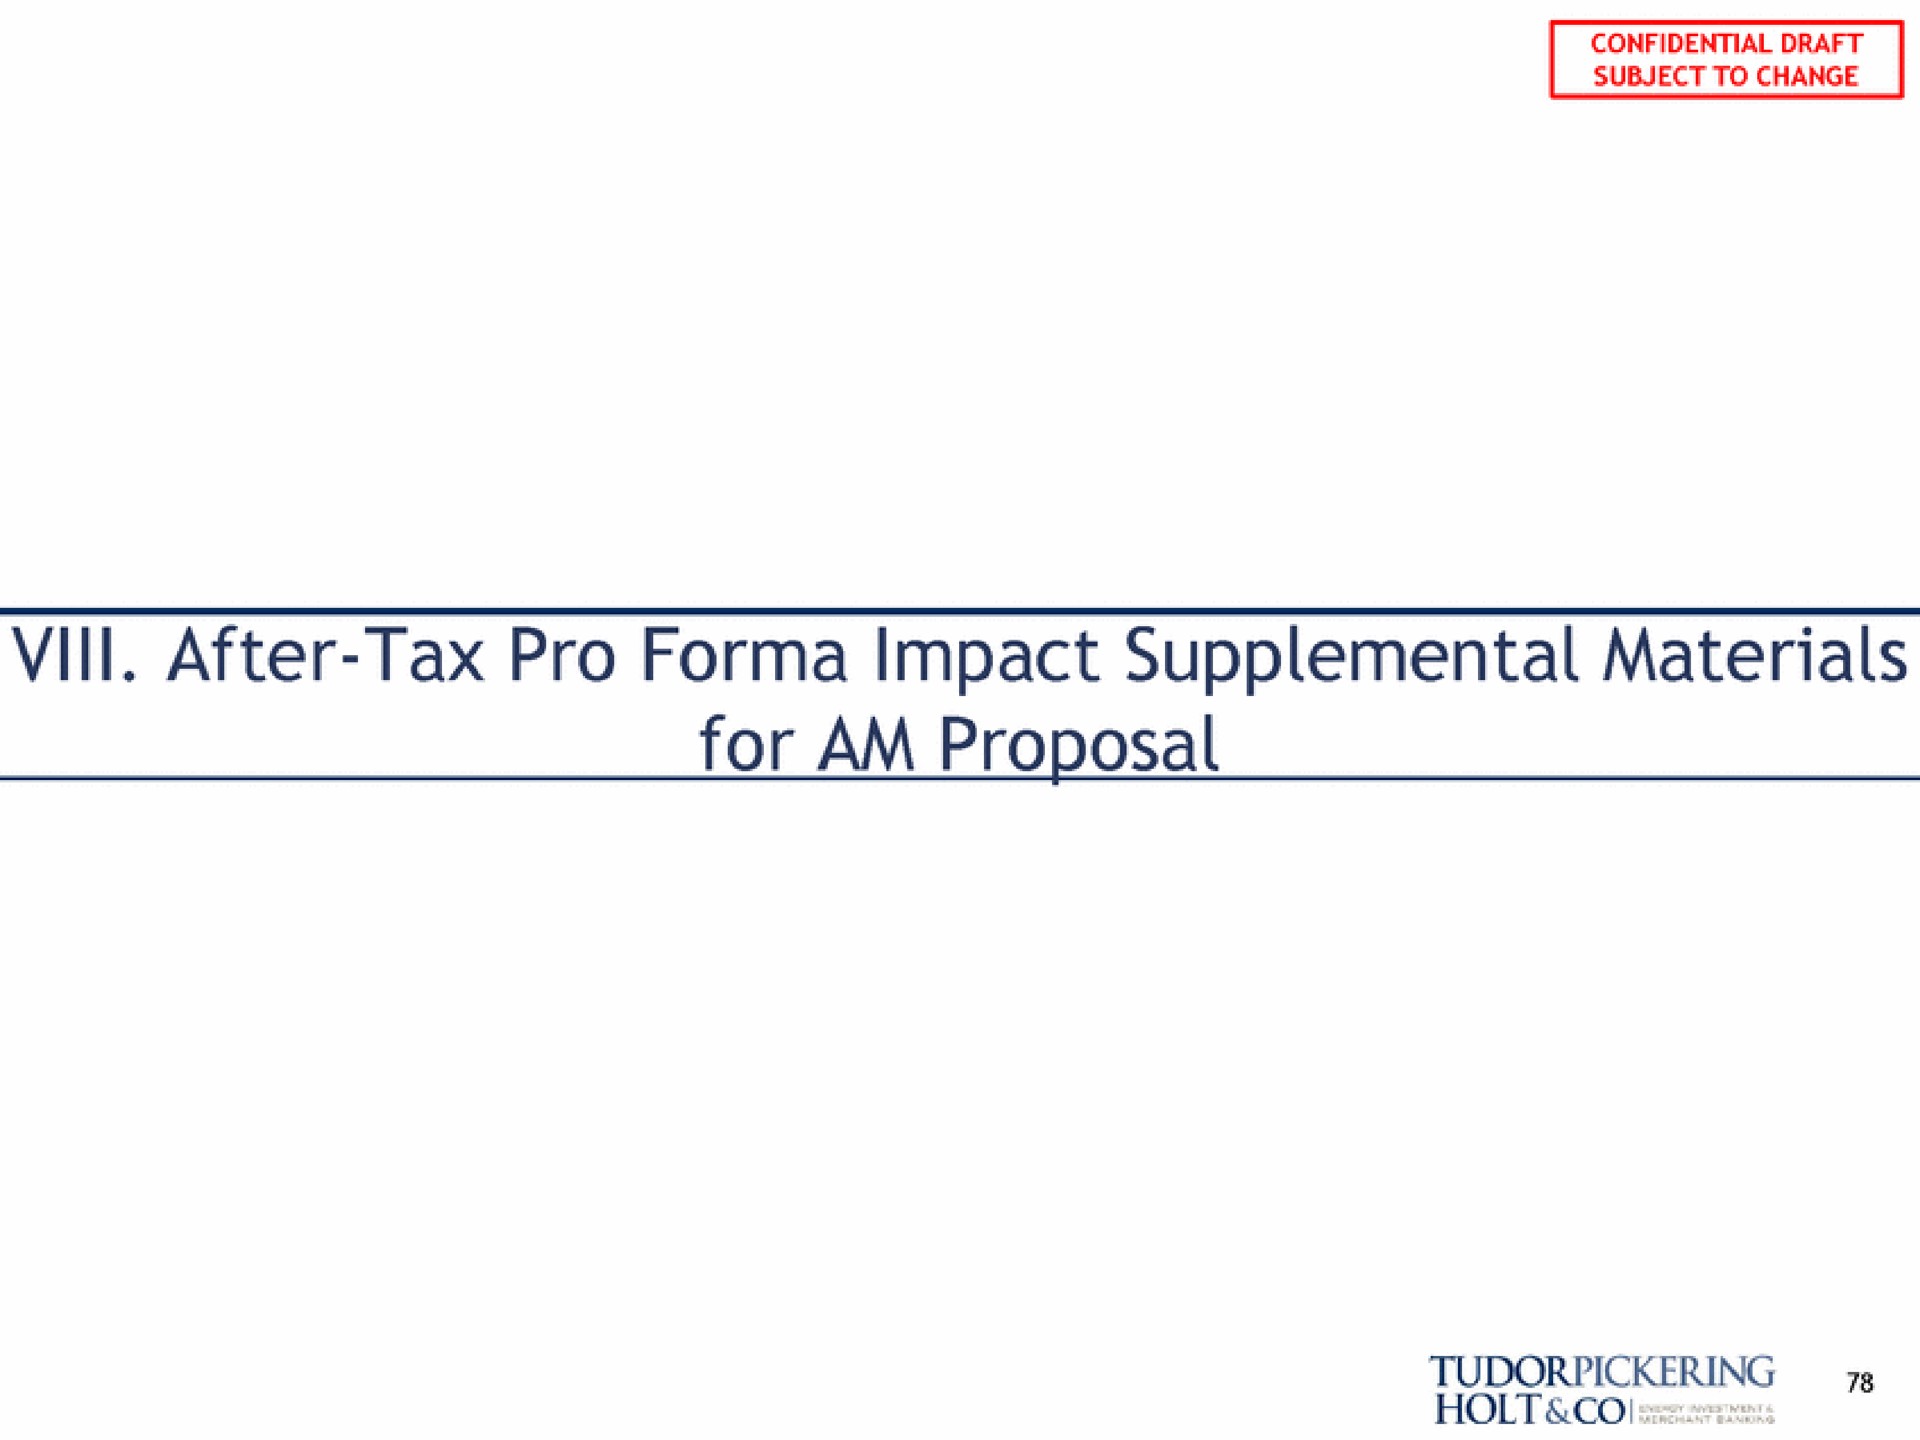 subject to change vill after tax pro impact supplemental materials for am proposal | Tudor, Pickering, Holt & Co